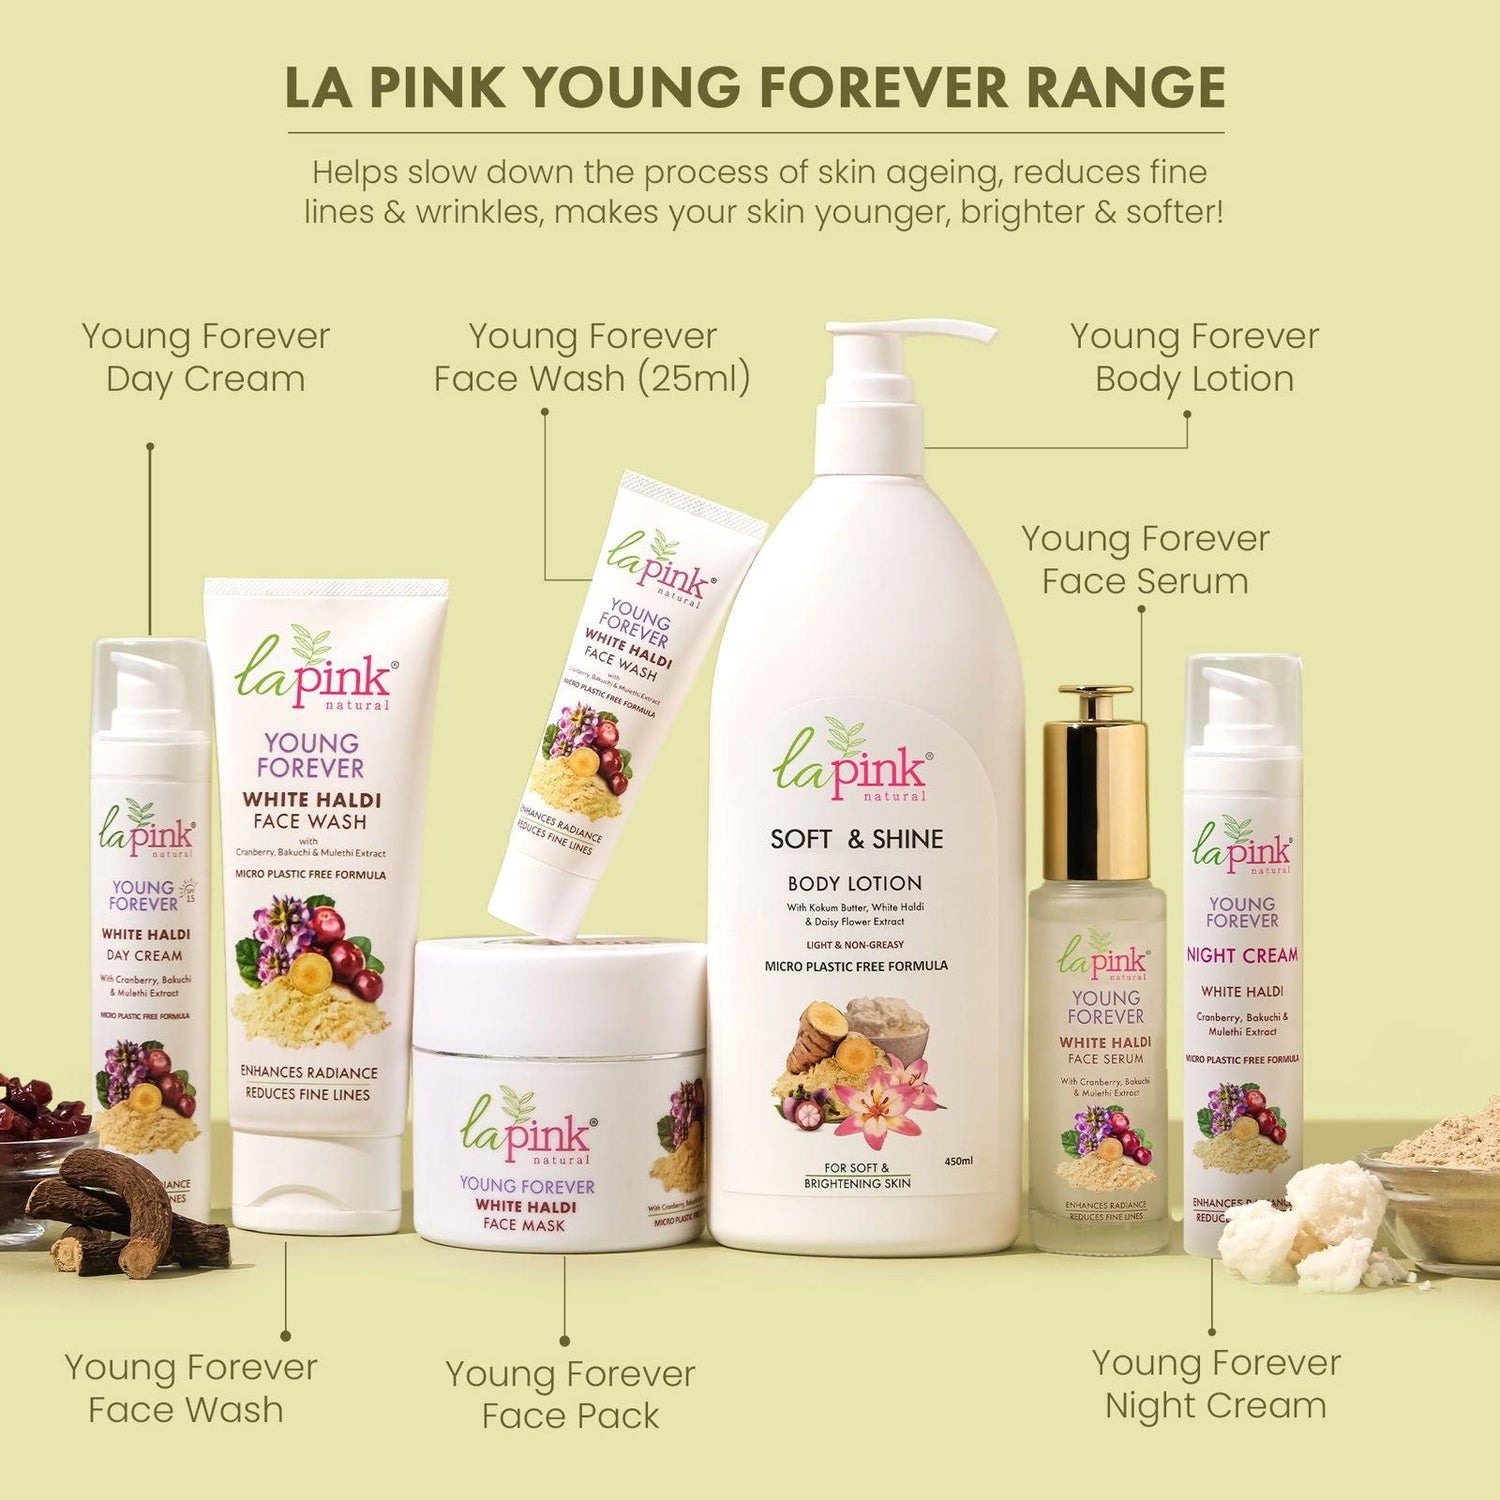 YOUNG FOREVER NIGHT CREAM 50 gm (Pack of 2) - La Pink